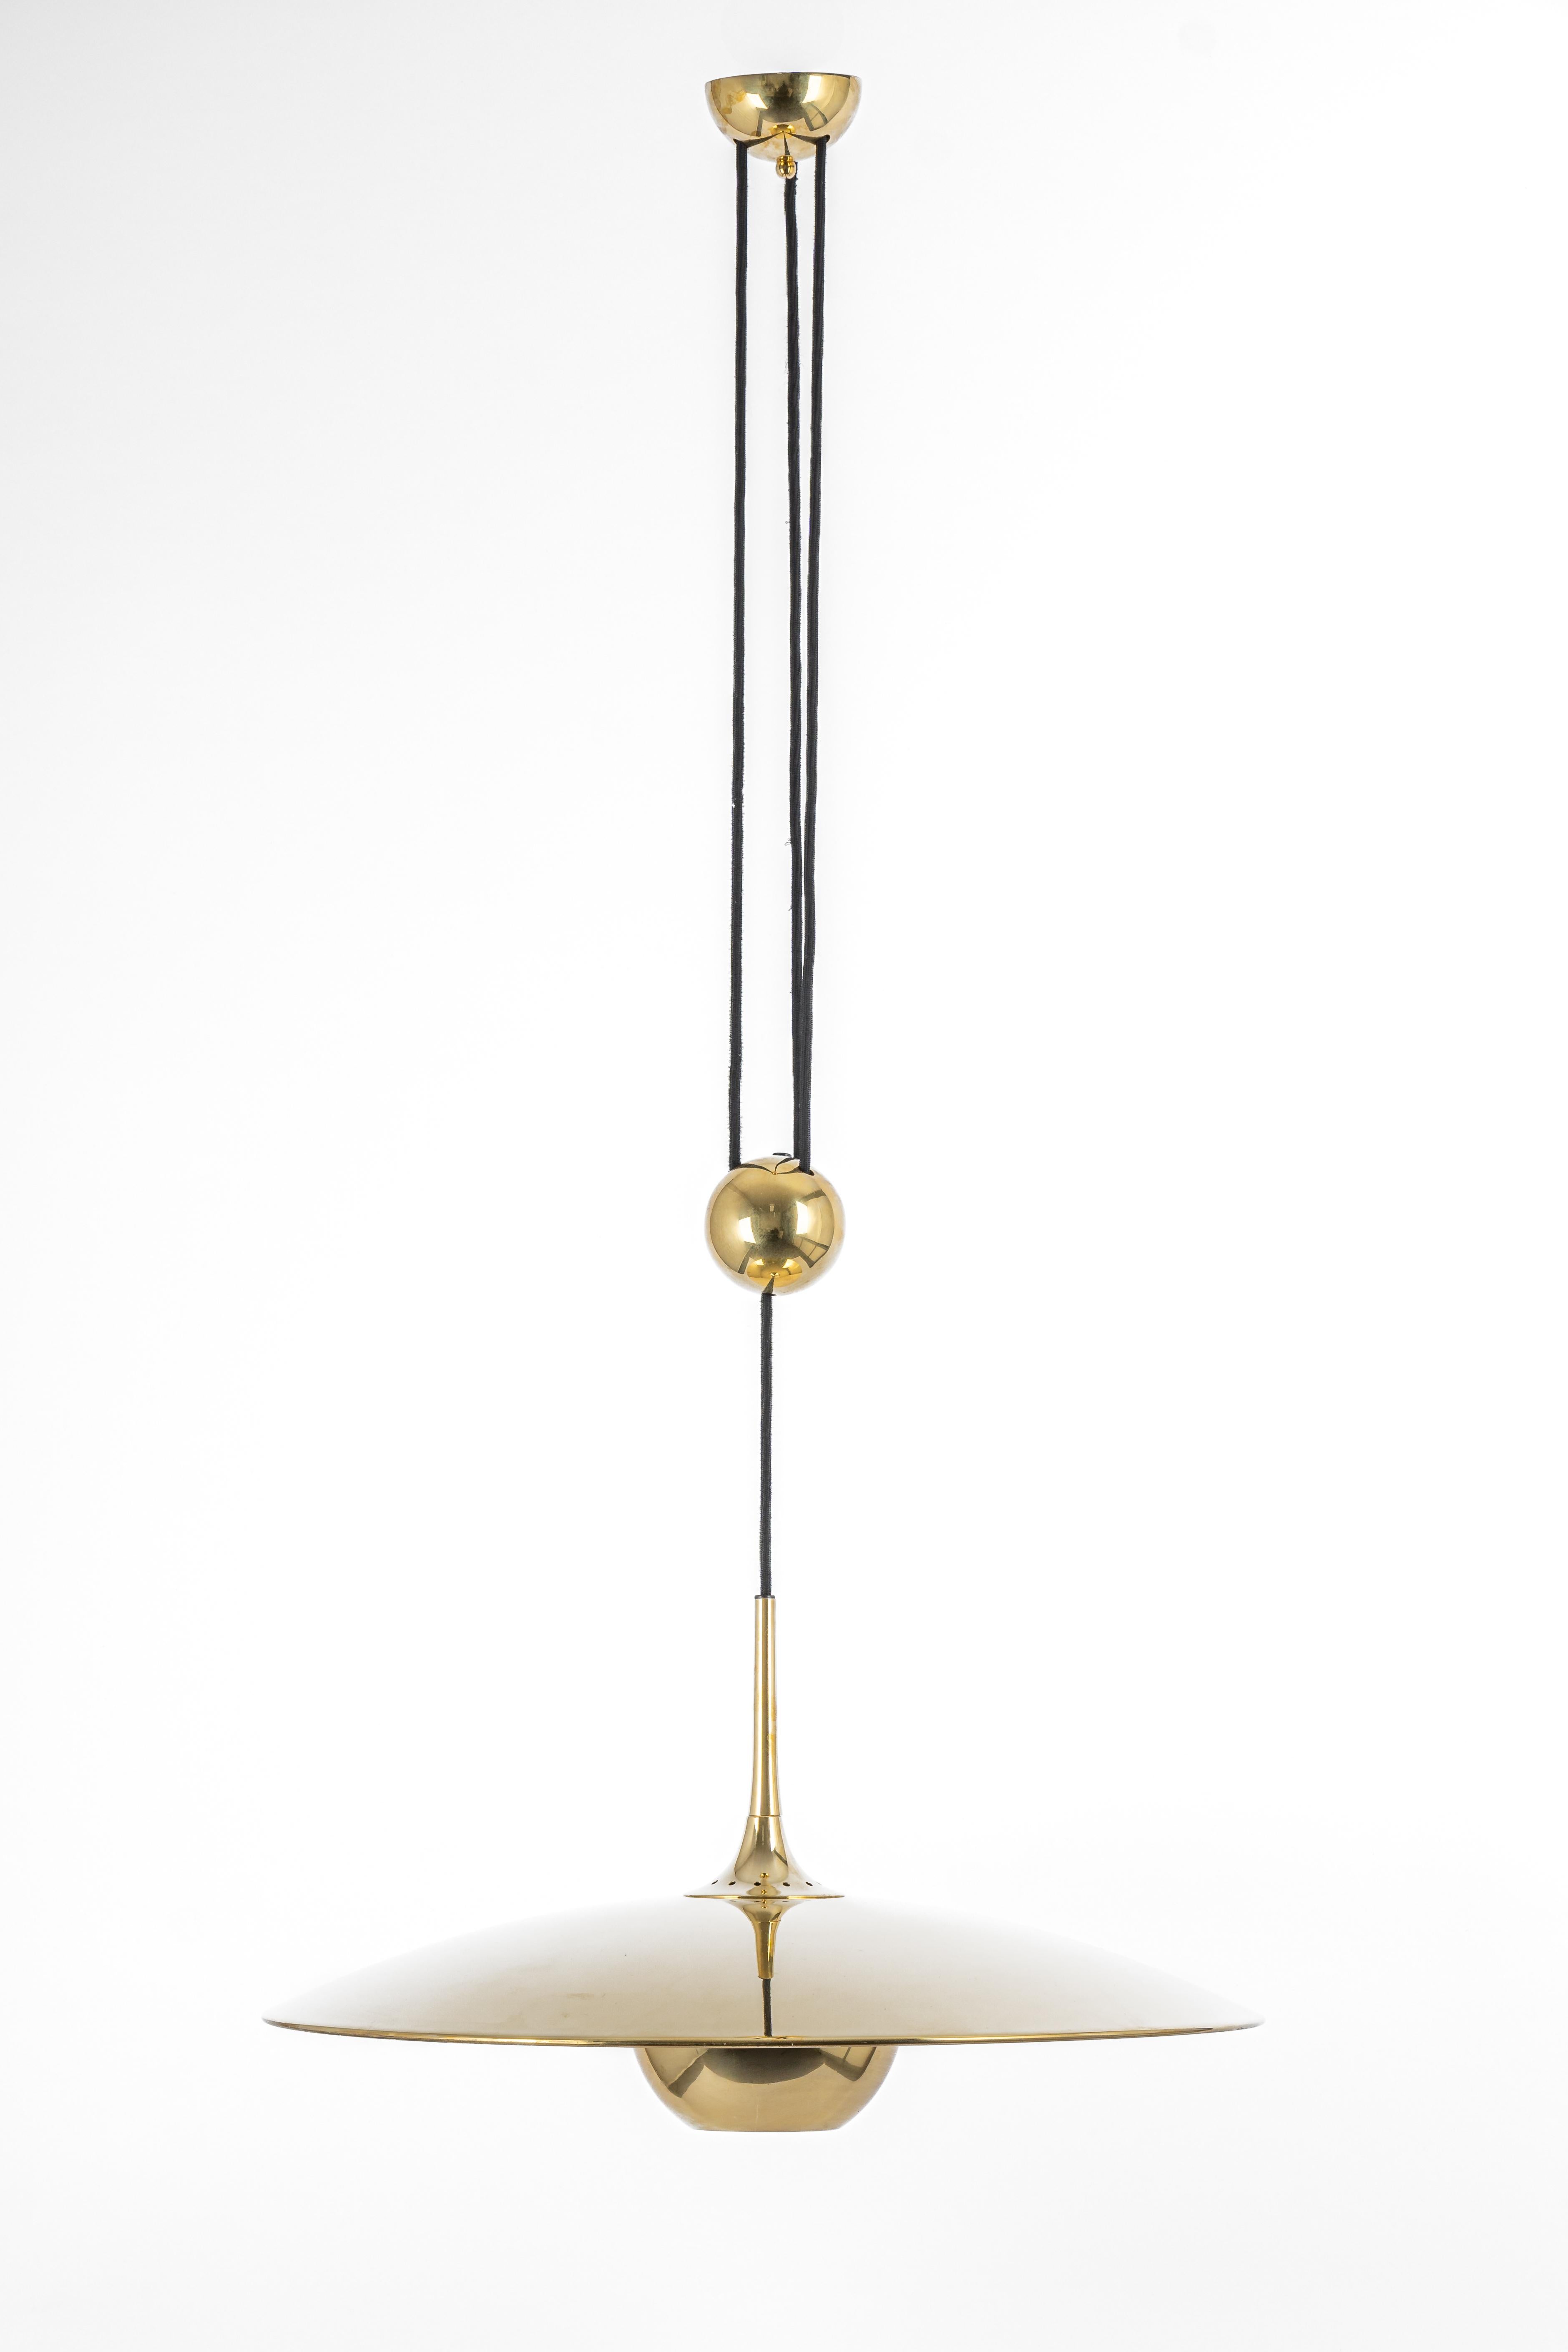 Brass counter balance pendant by German lighting designed by Florian Schulz. Heavy brass ball counterweight and brass disc. Cloth cord. 

 Very good vintage condition. The height is adjustable.

Sockets: 1 x E26/E27 standard bulb 

Dimensions: